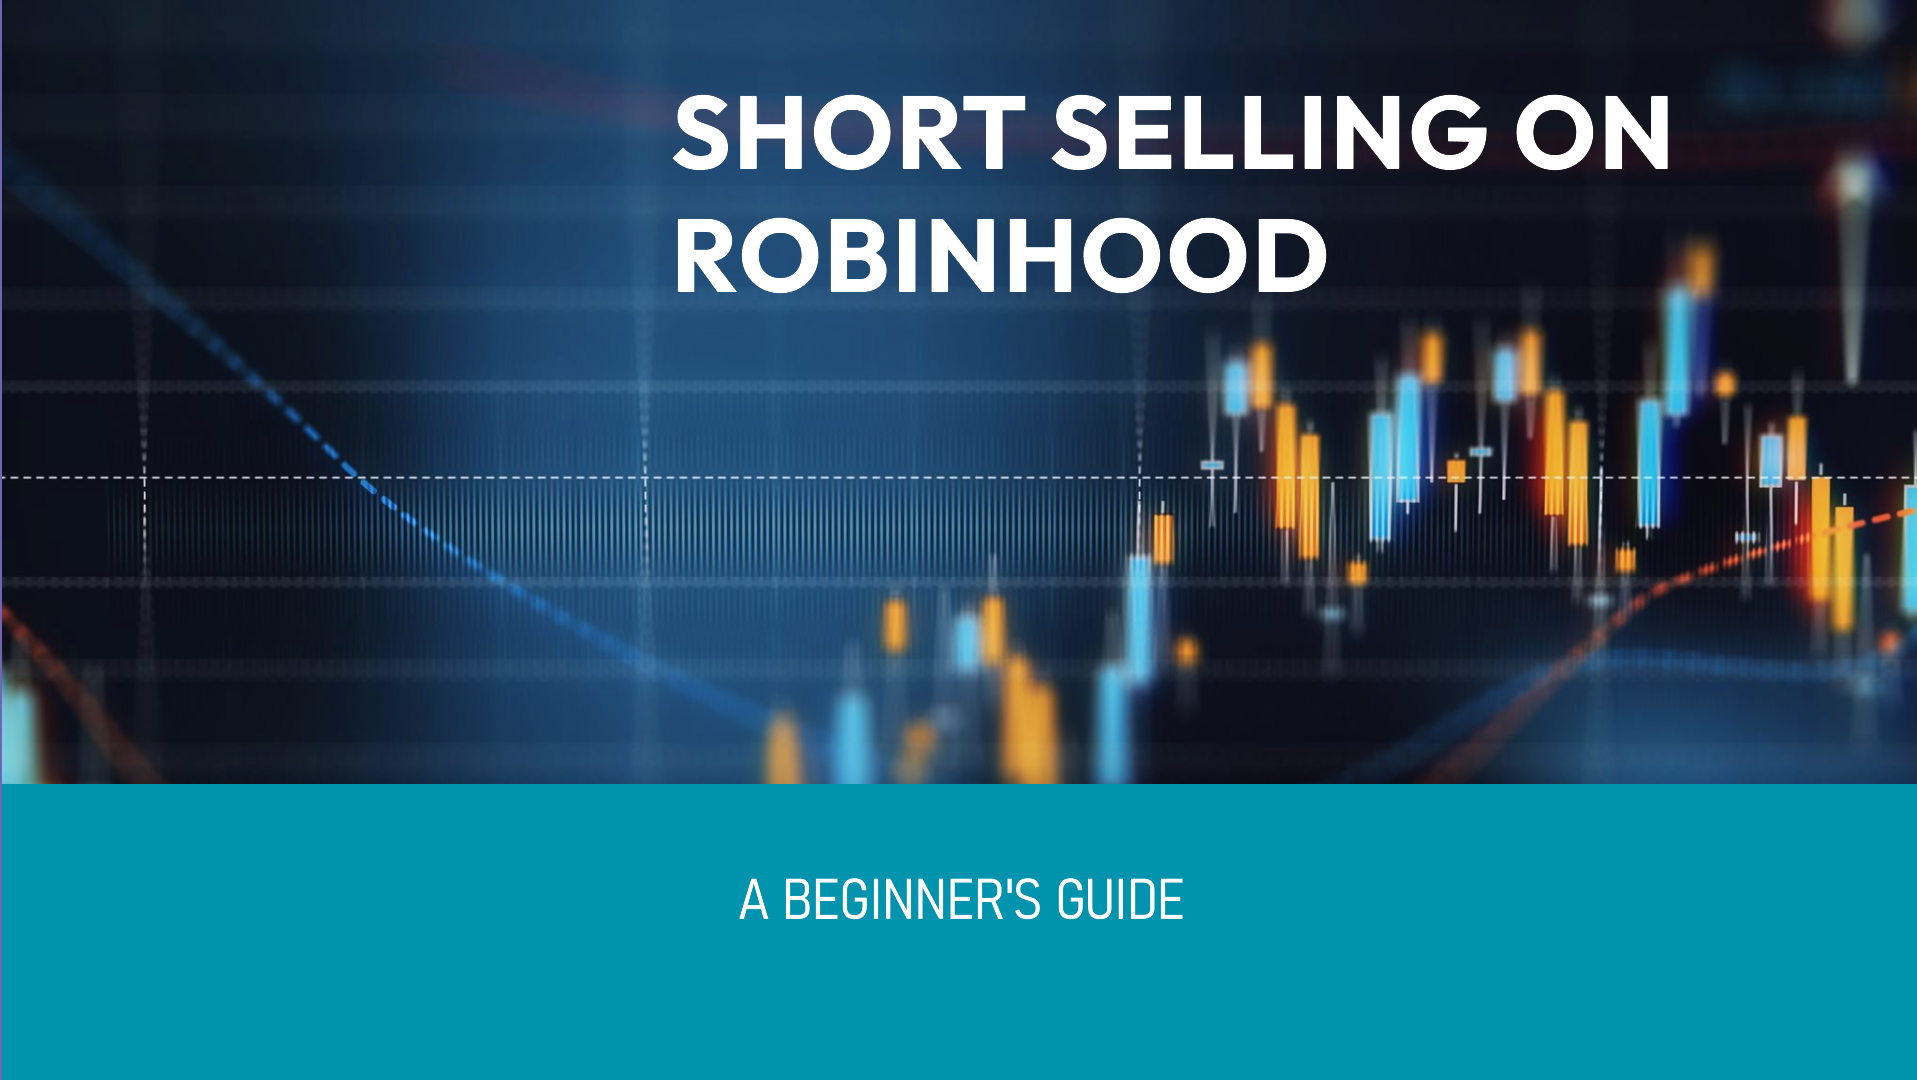 How to Short Sell a Stock on Robinhood: 5 Easy Steps